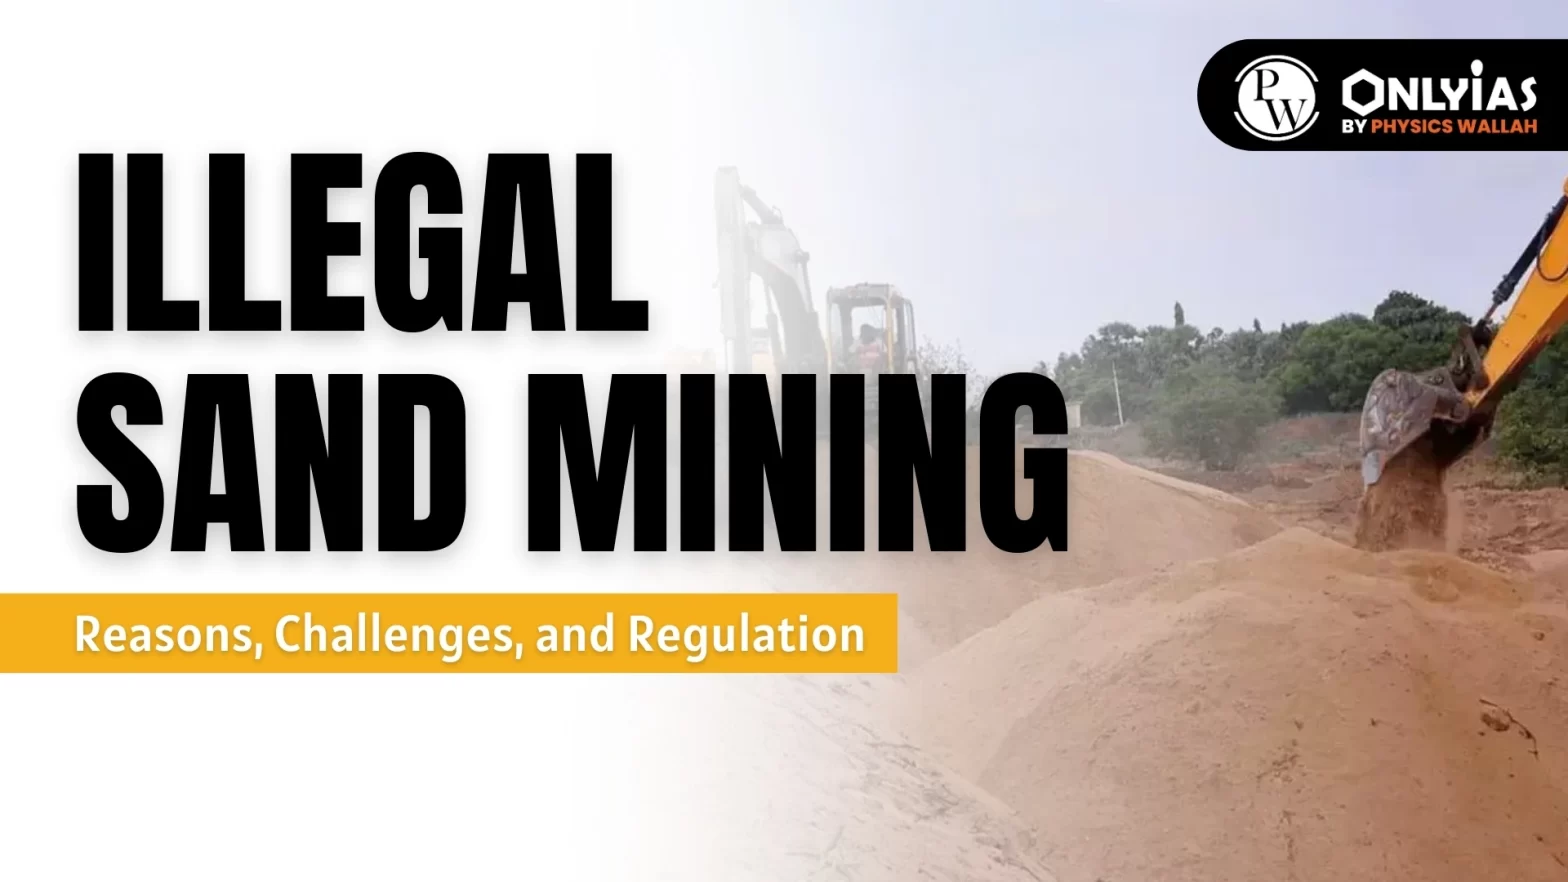 Illegal Sand Mining: Reasons, Challenges, and Regulation